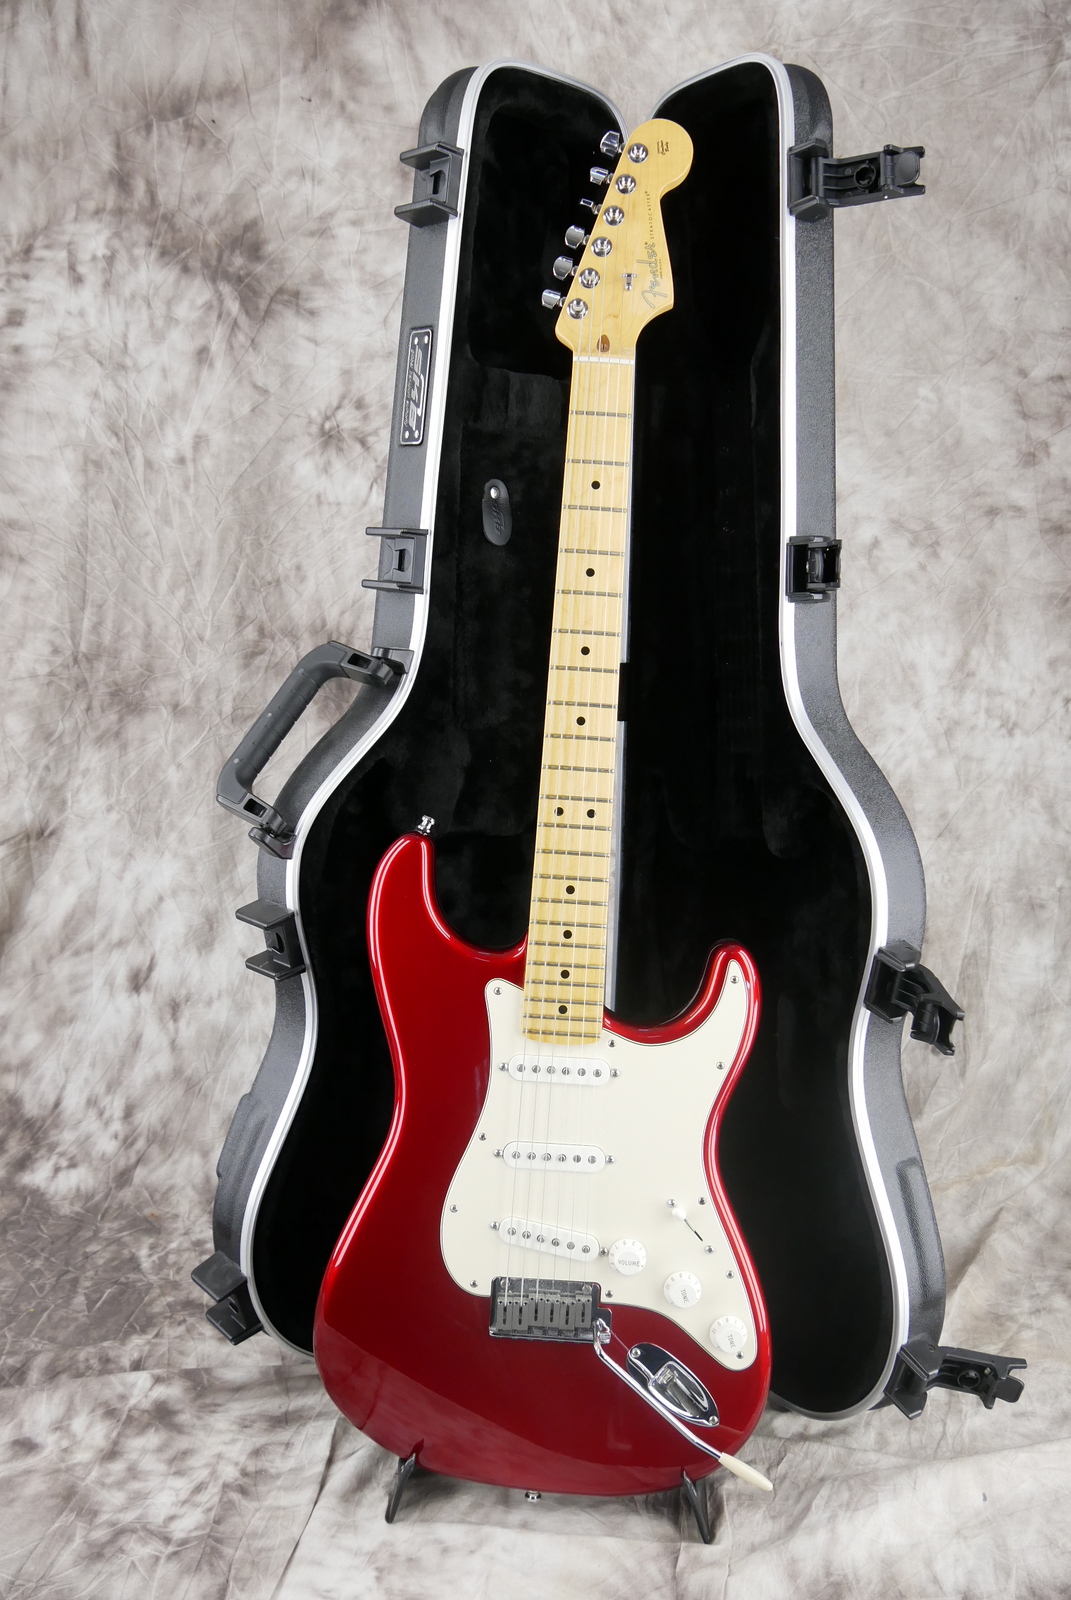 img/vintage/5279/Fender_Stratocaster_USA_built_from_parts_candy_apple_red_2015-013.JPG